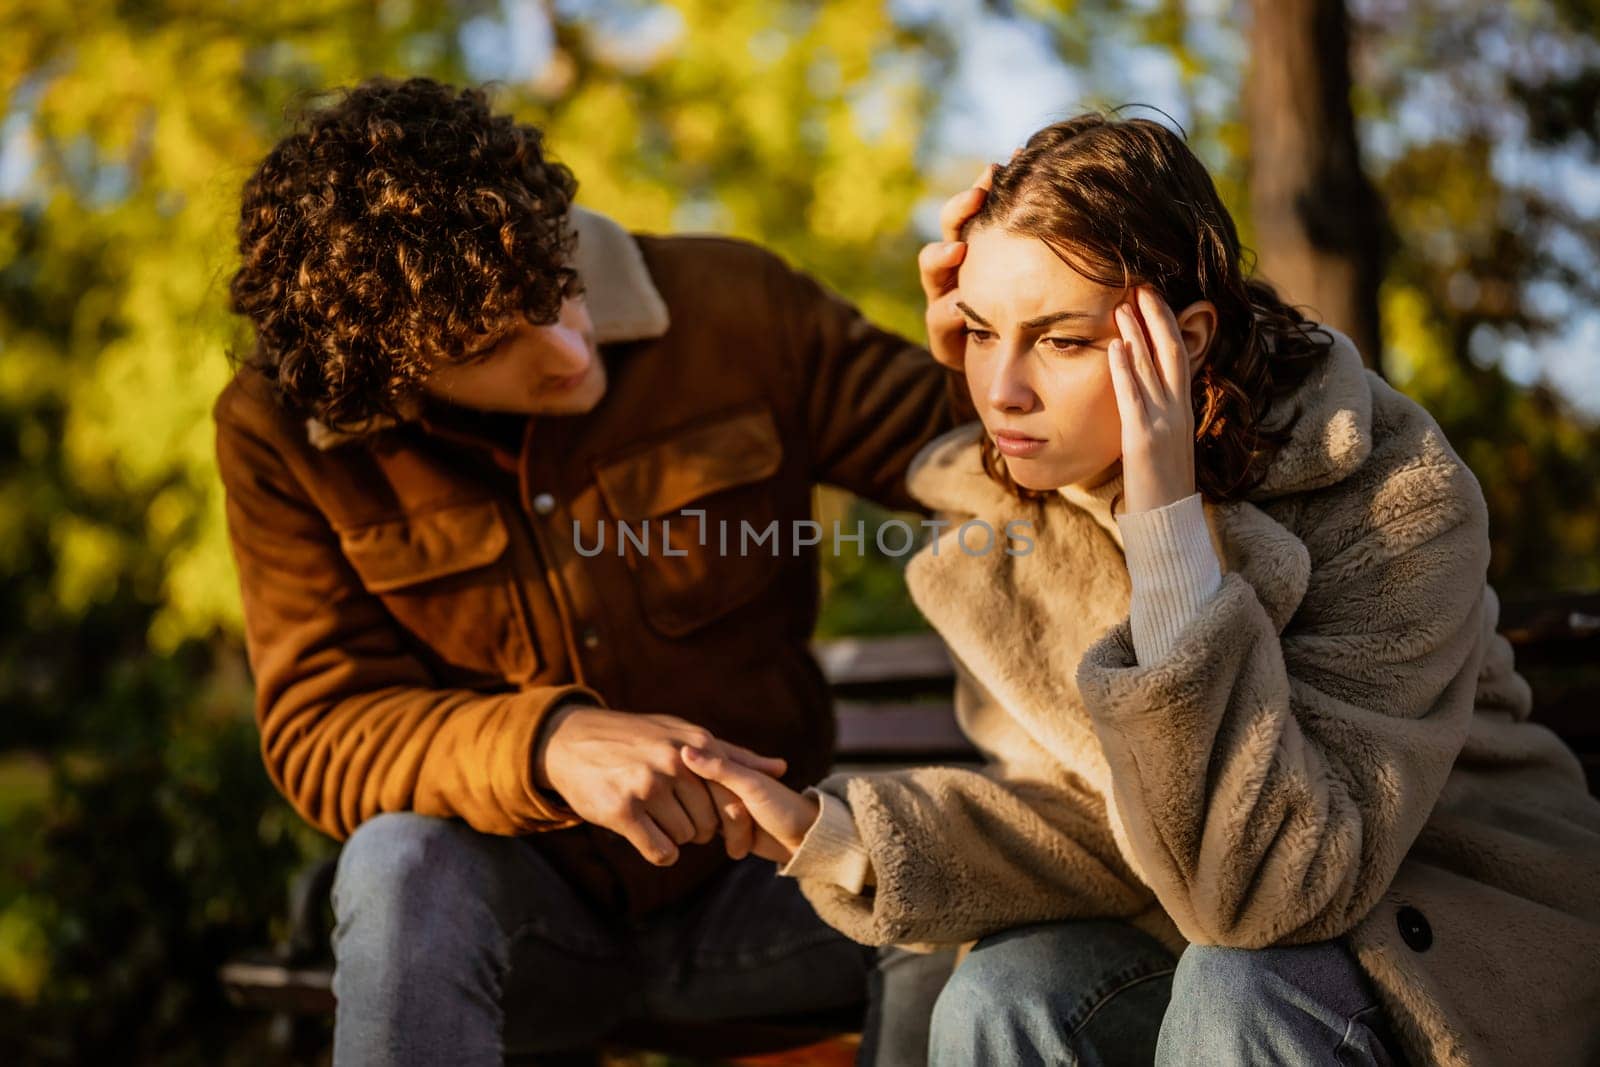 Young couple is sitting in park on sunny day. Woman is sad and man in consoling her.